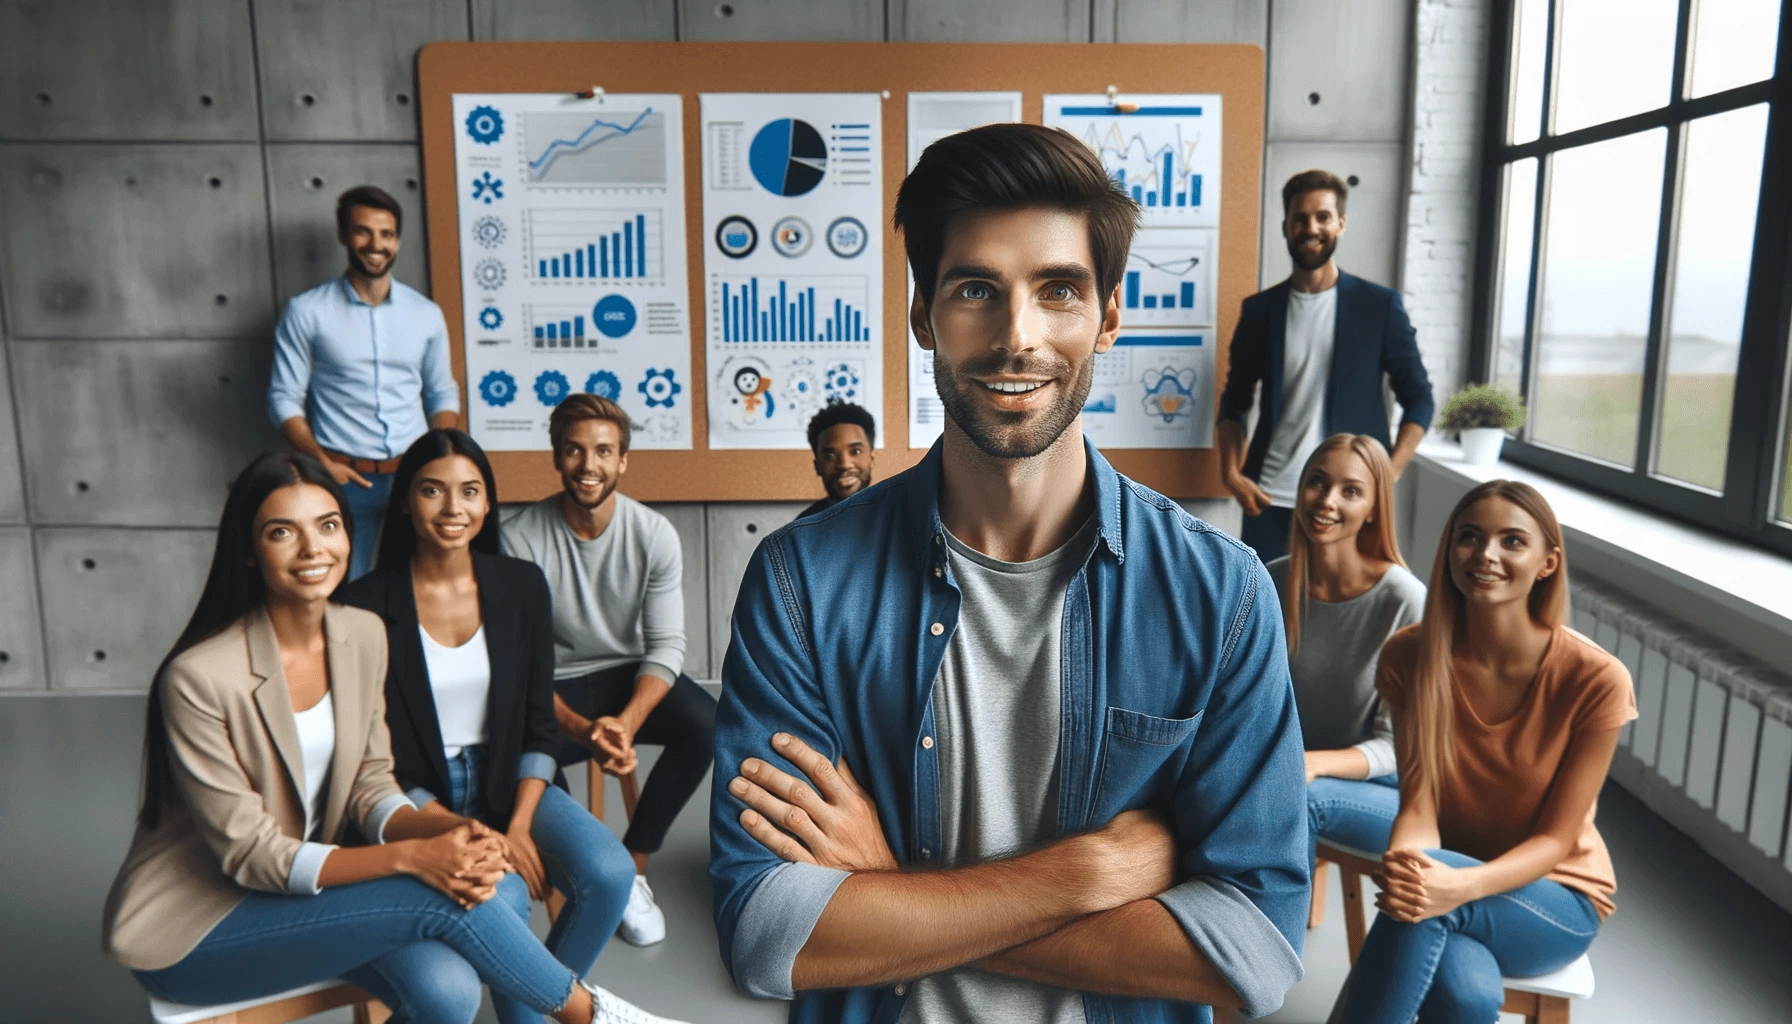 Graphic of smiling entrepreneur and his team behind him